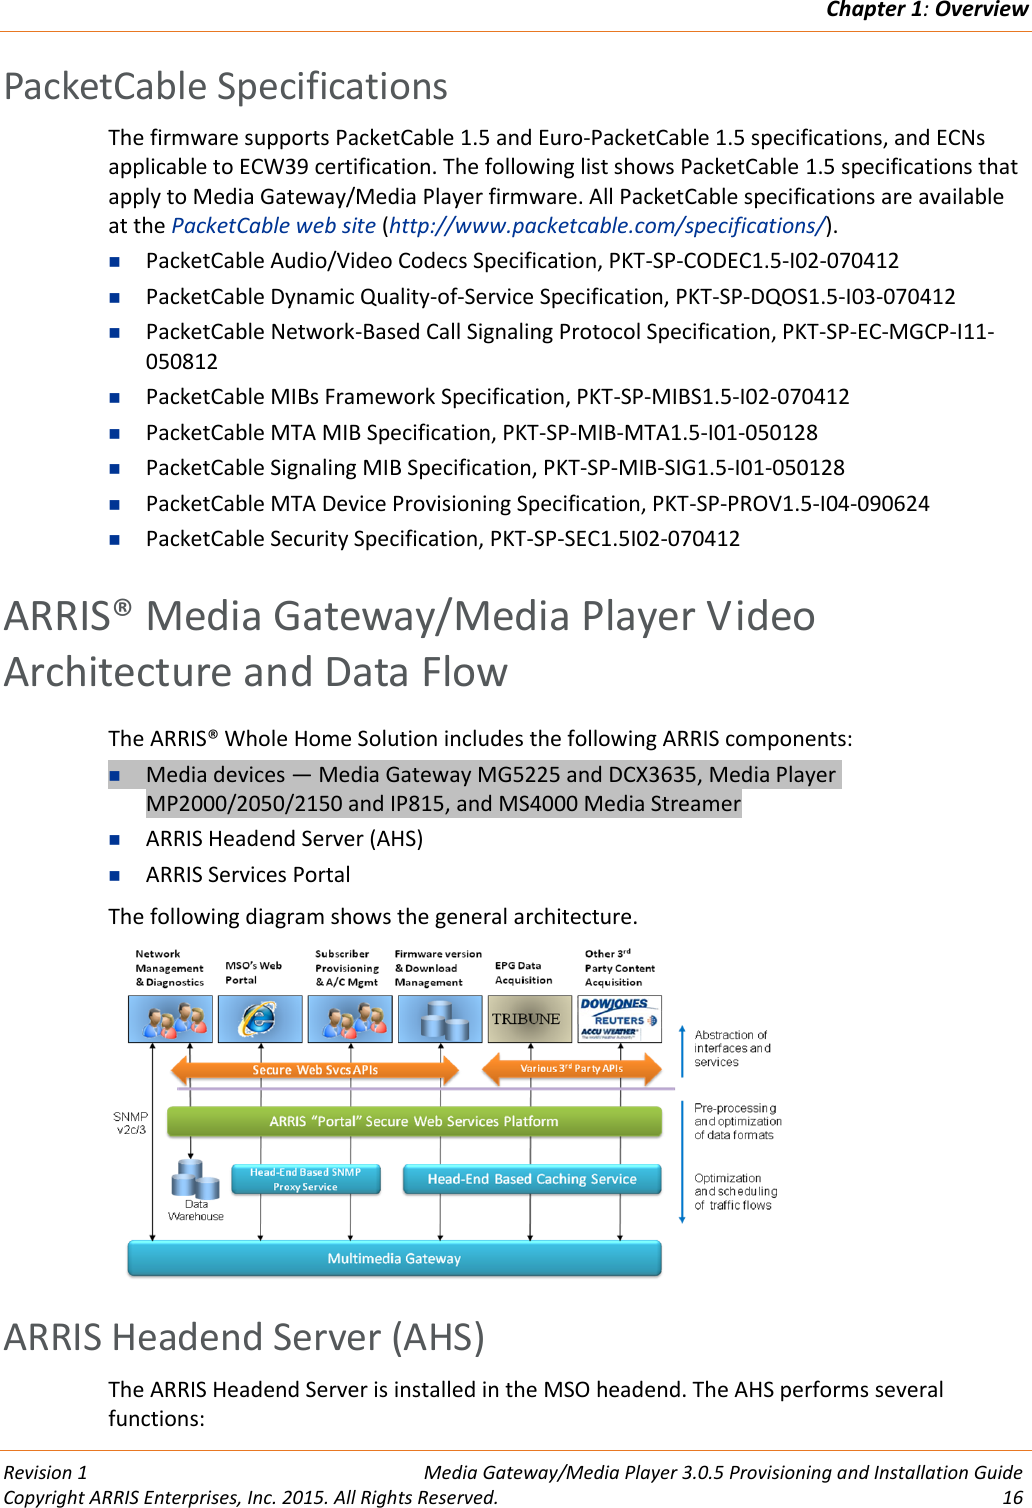 Chapter 1: Overview  Revision 1  Media Gateway/Media Player 3.0.5 Provisioning and Installation Guide Copyright ARRIS Enterprises, Inc. 2015. All Rights Reserved.  16  PacketCable Specifications The firmware supports PacketCable 1.5 and Euro-PacketCable 1.5 specifications, and ECNs applicable to ECW39 certification. The following list shows PacketCable 1.5 specifications that apply to Media Gateway/Media Player firmware. All PacketCable specifications are available at the PacketCable web site (http://www.packetcable.com/specifications/).  PacketCable Audio/Video Codecs Specification, PKT-SP-CODEC1.5-I02-070412  PacketCable Dynamic Quality-of-Service Specification, PKT-SP-DQOS1.5-I03-070412  PacketCable Network-Based Call Signaling Protocol Specification, PKT-SP-EC-MGCP-I11-050812  PacketCable MIBs Framework Specification, PKT-SP-MIBS1.5-I02-070412  PacketCable MTA MIB Specification, PKT-SP-MIB-MTA1.5-I01-050128  PacketCable Signaling MIB Specification, PKT-SP-MIB-SIG1.5-I01-050128  PacketCable MTA Device Provisioning Specification, PKT-SP-PROV1.5-I04-090624  PacketCable Security Specification, PKT-SP-SEC1.5I02-070412   ARRIS® Media Gateway/Media Player Video Architecture and Data Flow The ARRIS® Whole Home Solution includes the following ARRIS components:  Media devices — Media Gateway MG5225 and DCX3635, Media Player MP2000/2050/2150 and IP815, and MS4000 Media Streamer  ARRIS Headend Server (AHS)  ARRIS Services Portal The following diagram shows the general architecture.    ARRIS Headend Server (AHS) The ARRIS Headend Server is installed in the MSO headend. The AHS performs several functions: 